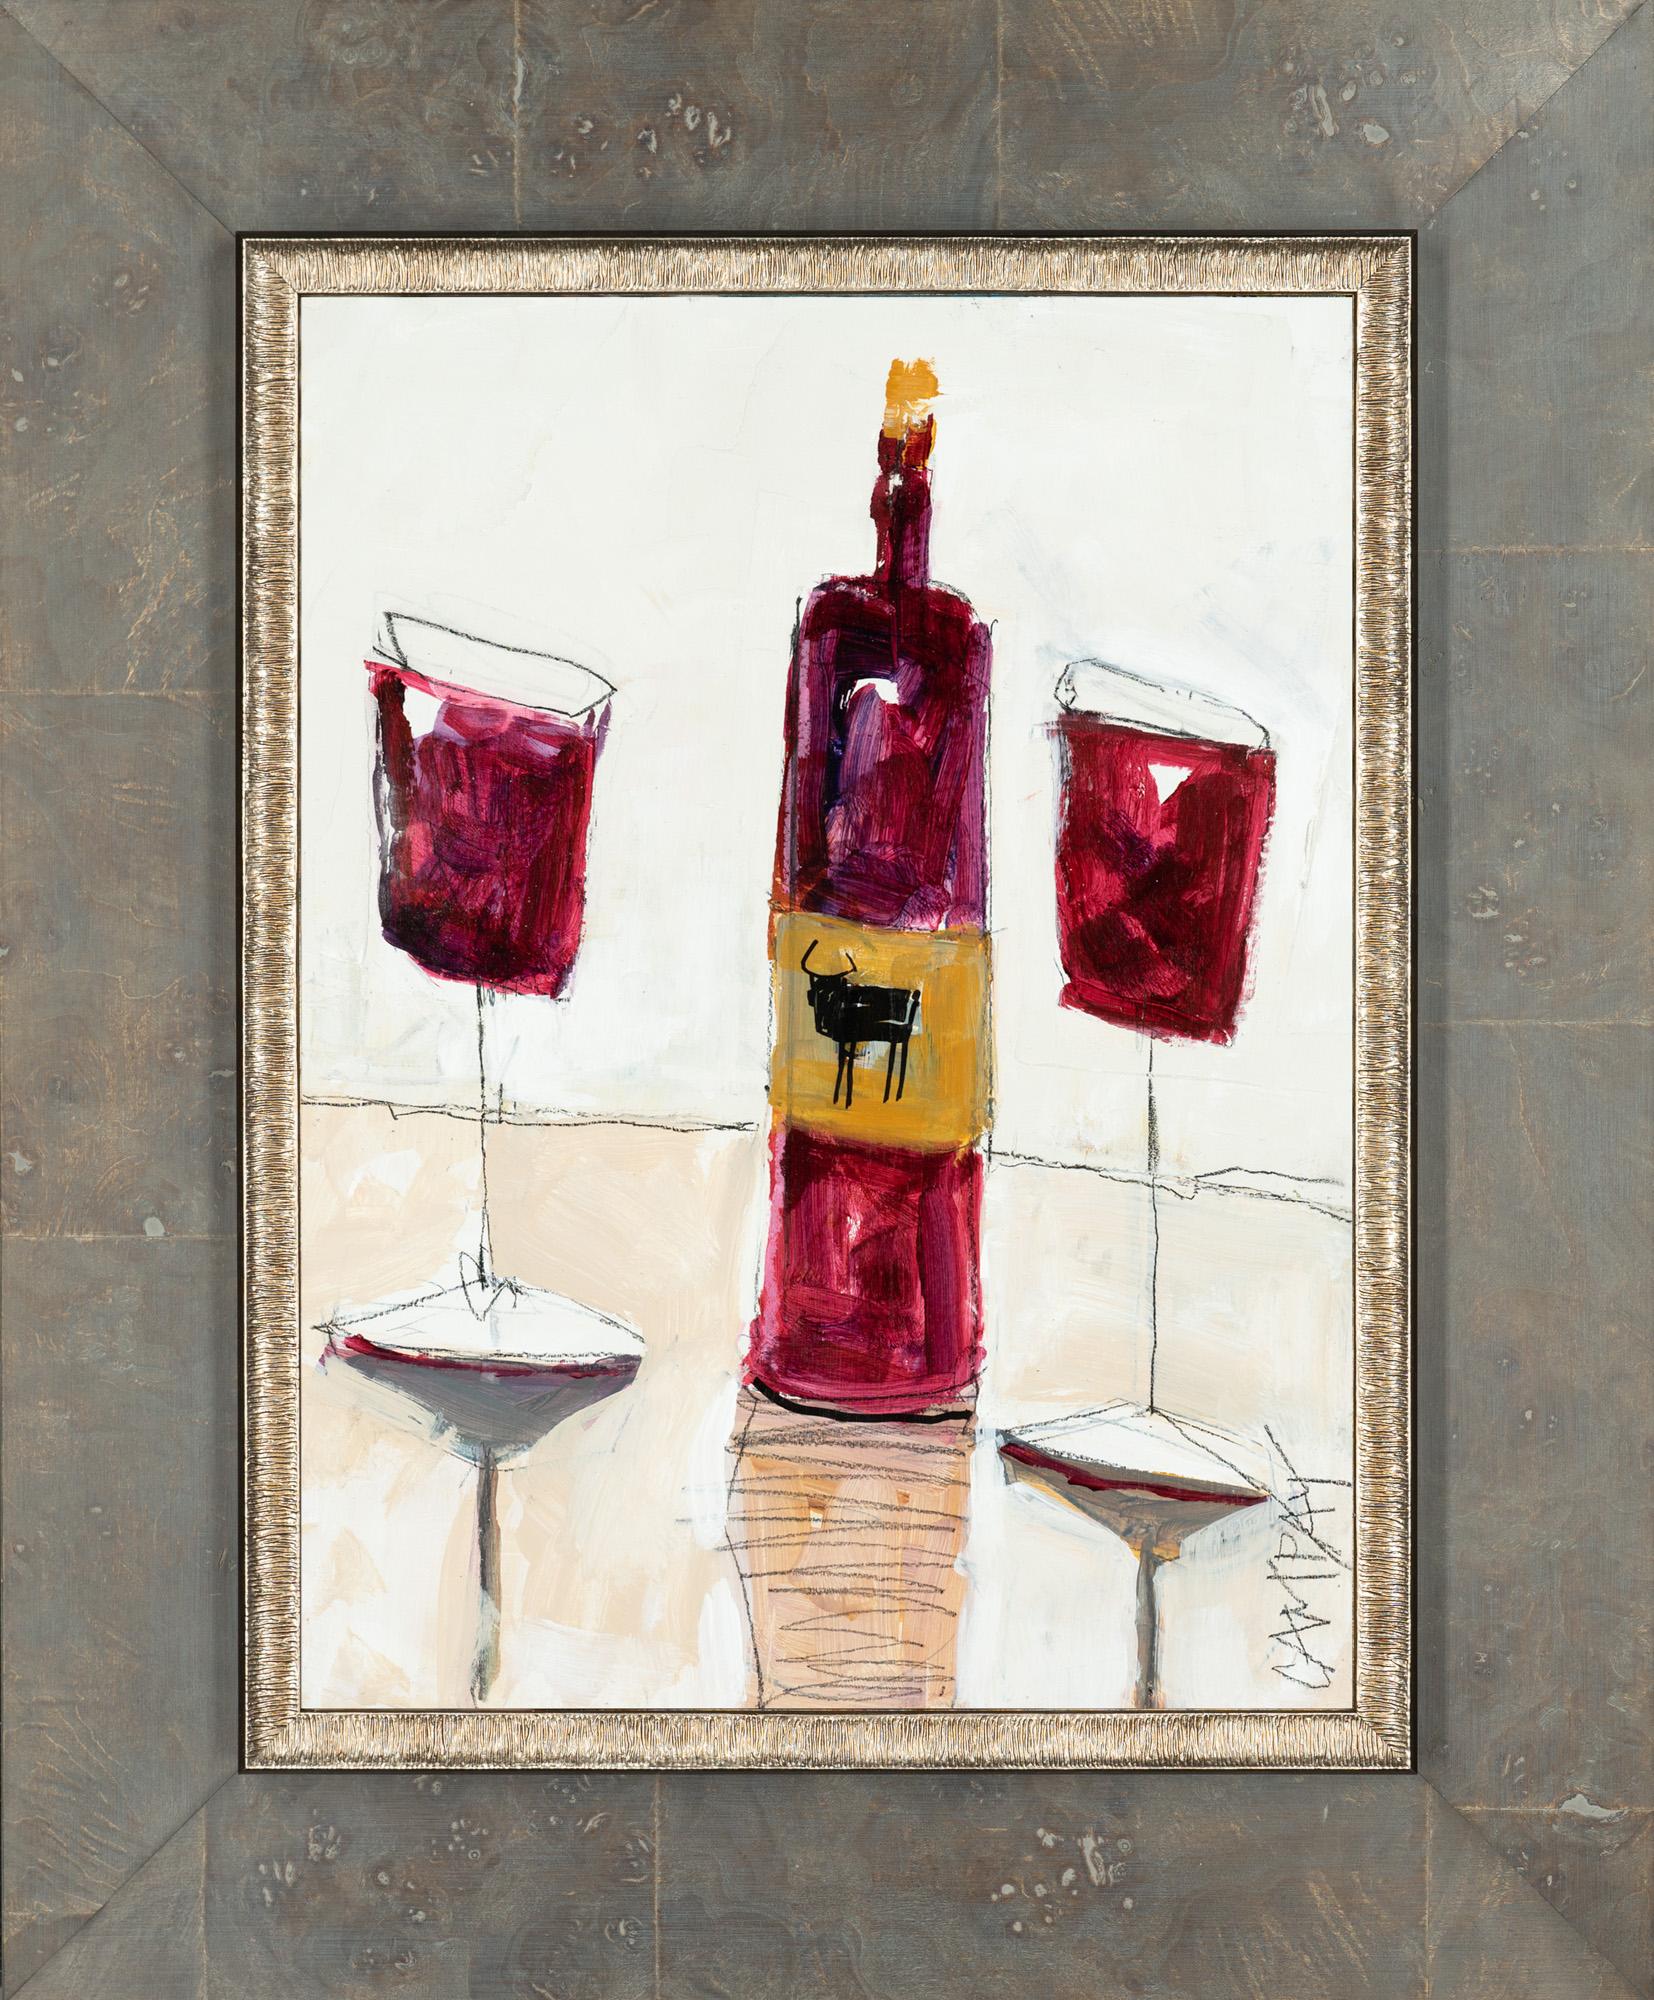 Dennis Campay Still-Life Painting - "Two Glasses" Contemporary Wine Still-Life Mixed Media on Panel Framed Painting